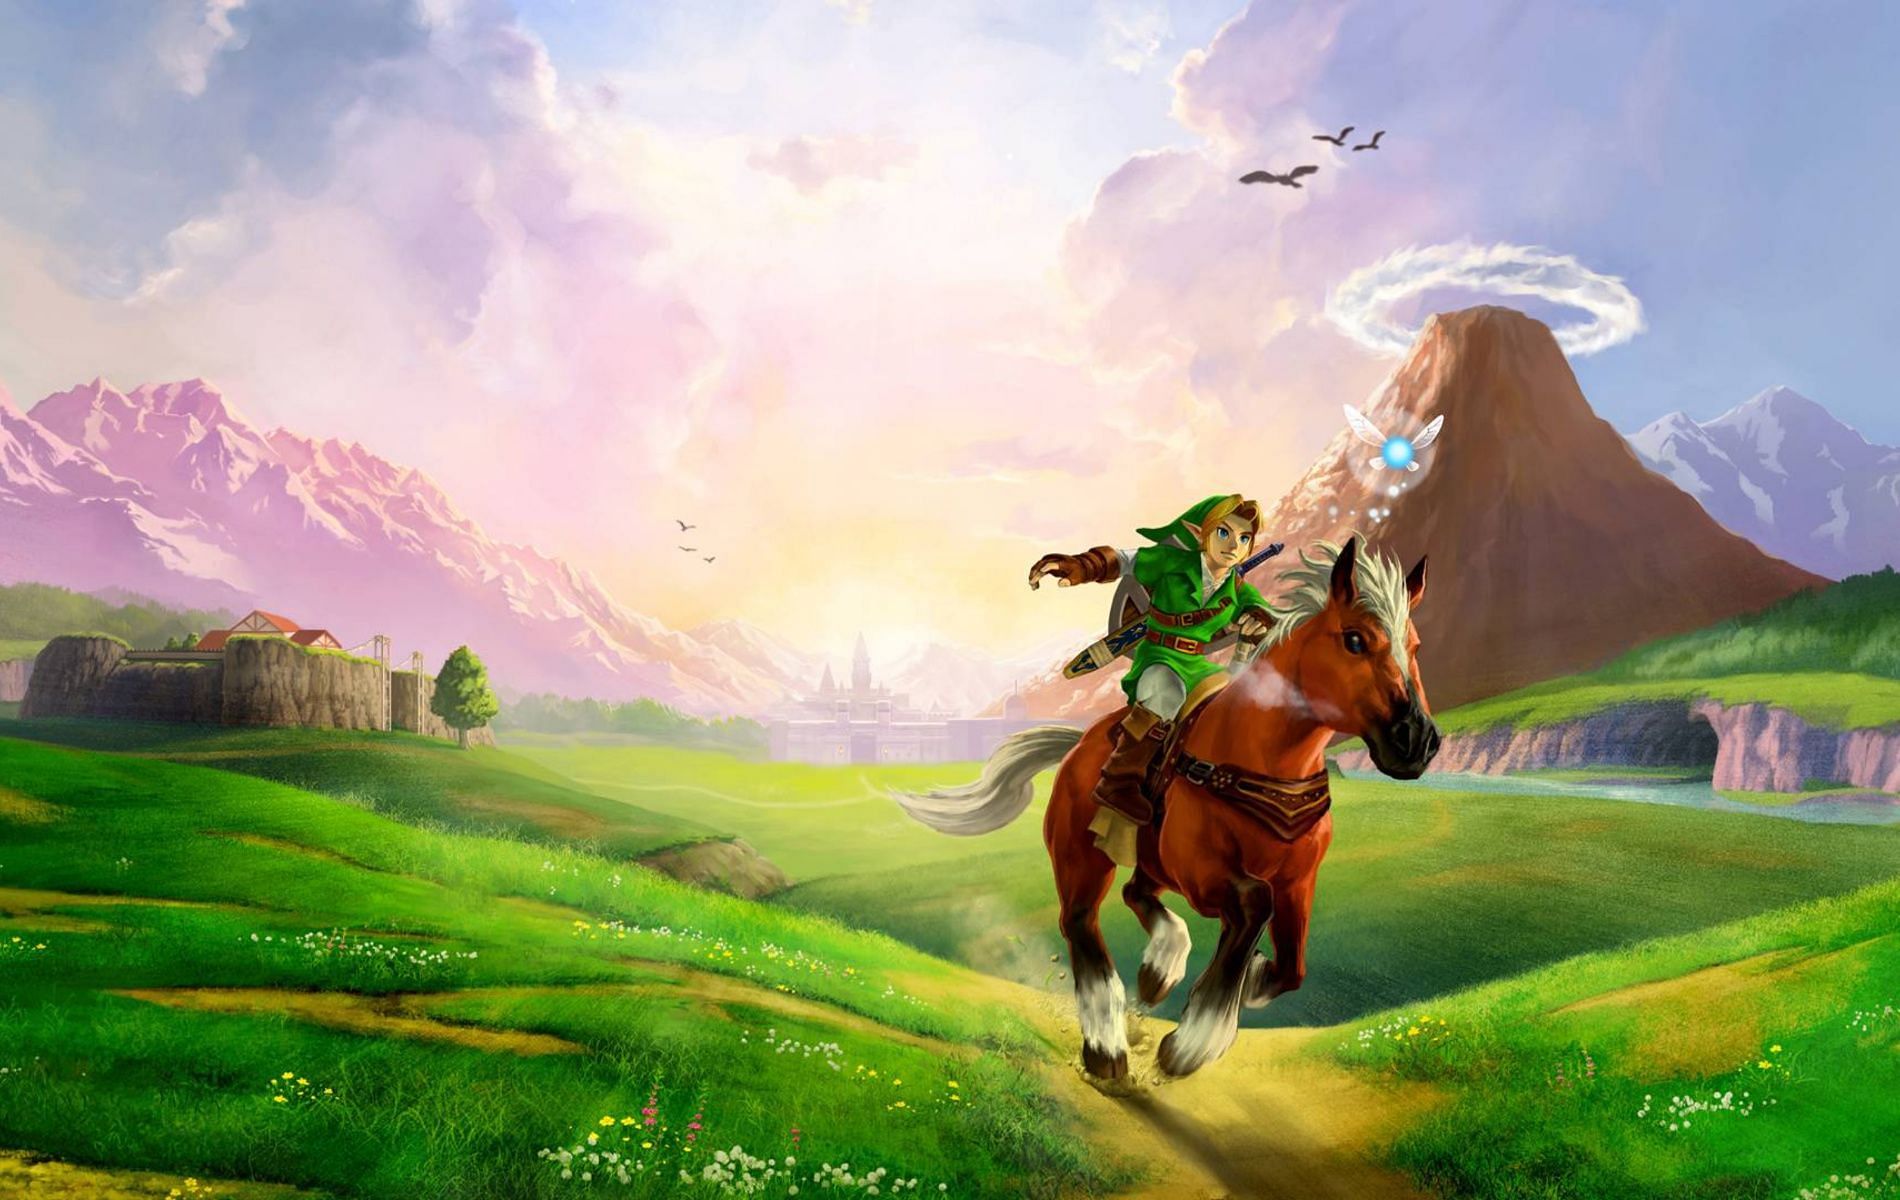 Official promotional art for The Legend of Zelda: Ocarina of Time video game by Nintendo